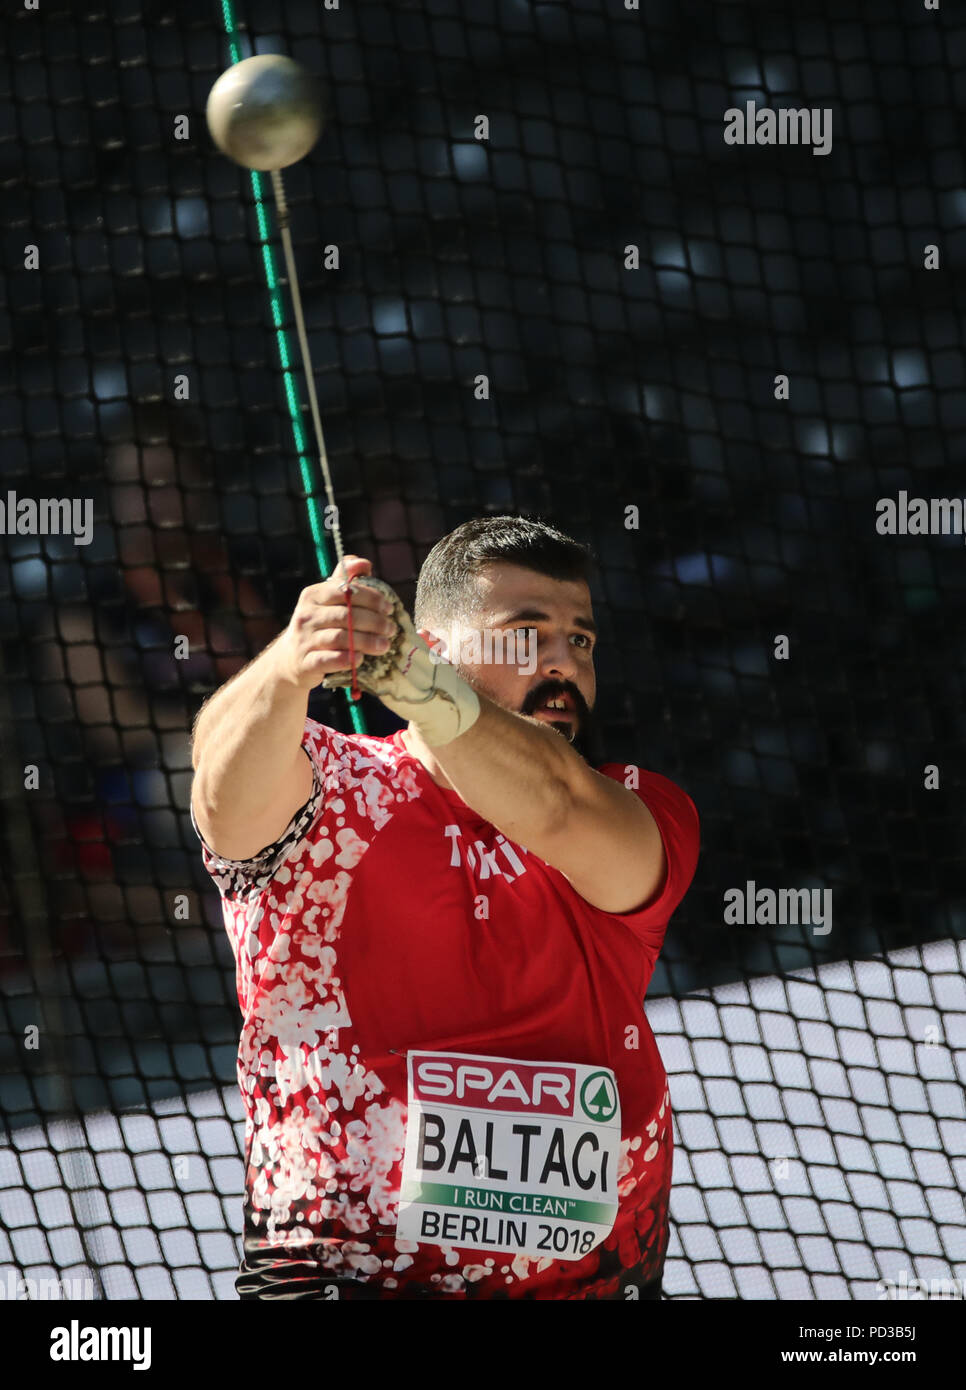 Page 3 - Athletics Hammer High Resolution Stock Photography and Images -  Alamy